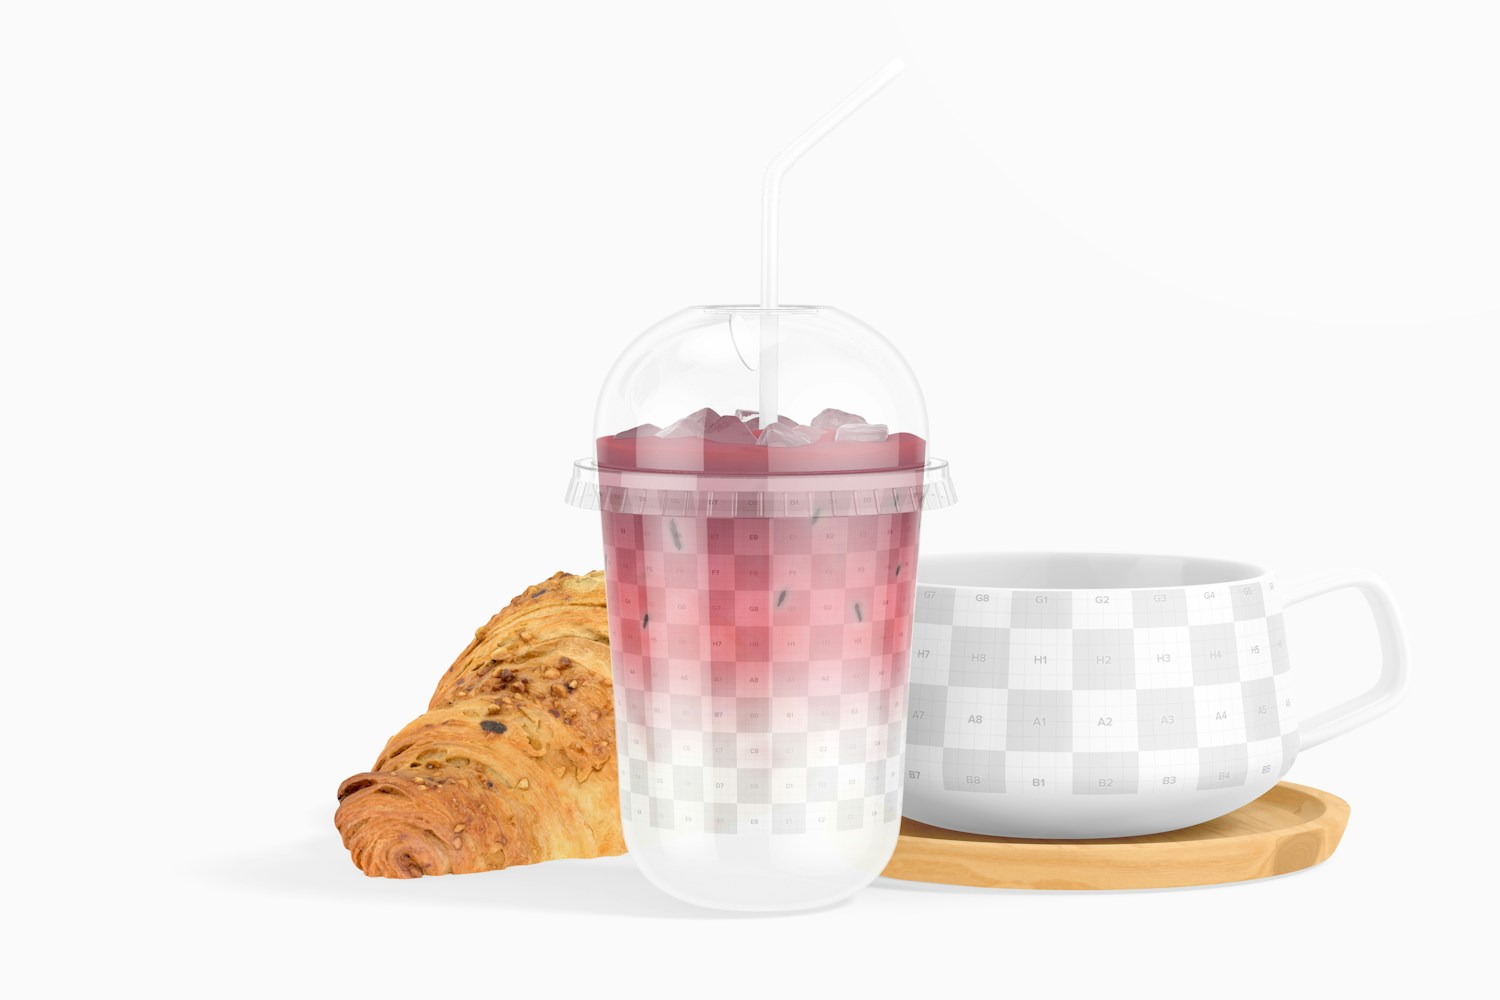 17 oz Plastic Cup Mockup, with Bread